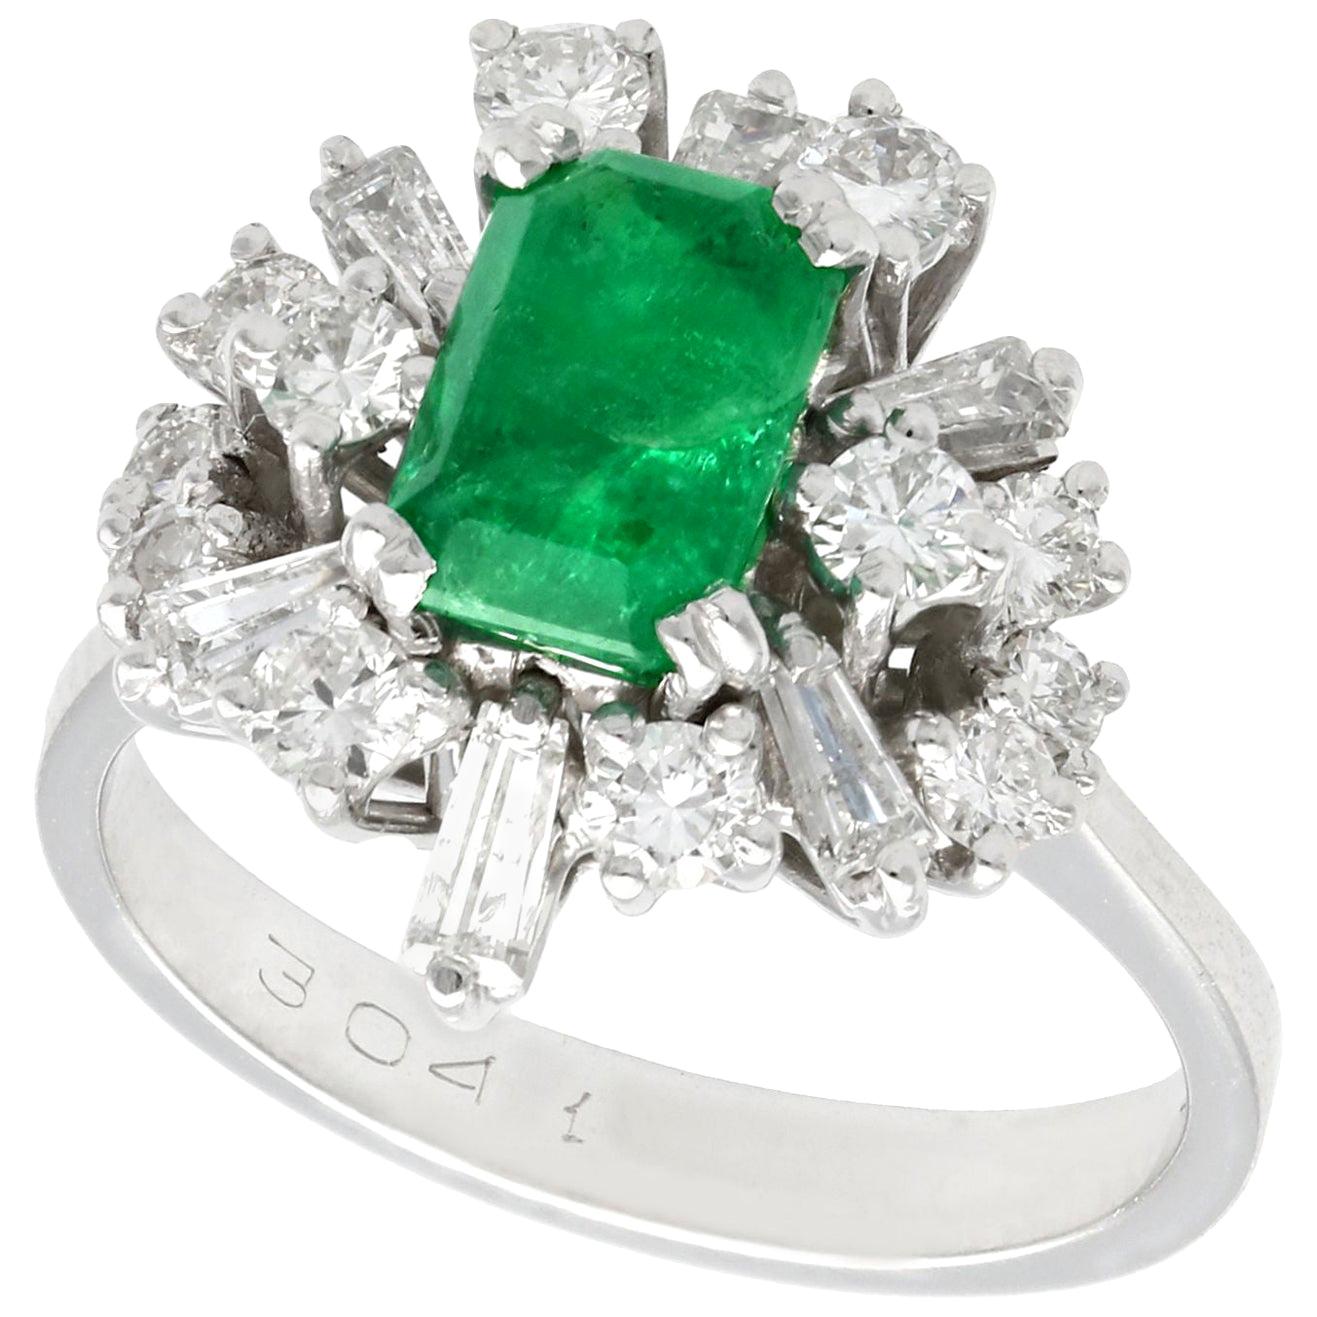 Vintage 1.48 Carat Emerald and 1.08 Carat Diamond White Gold Cluster Ring